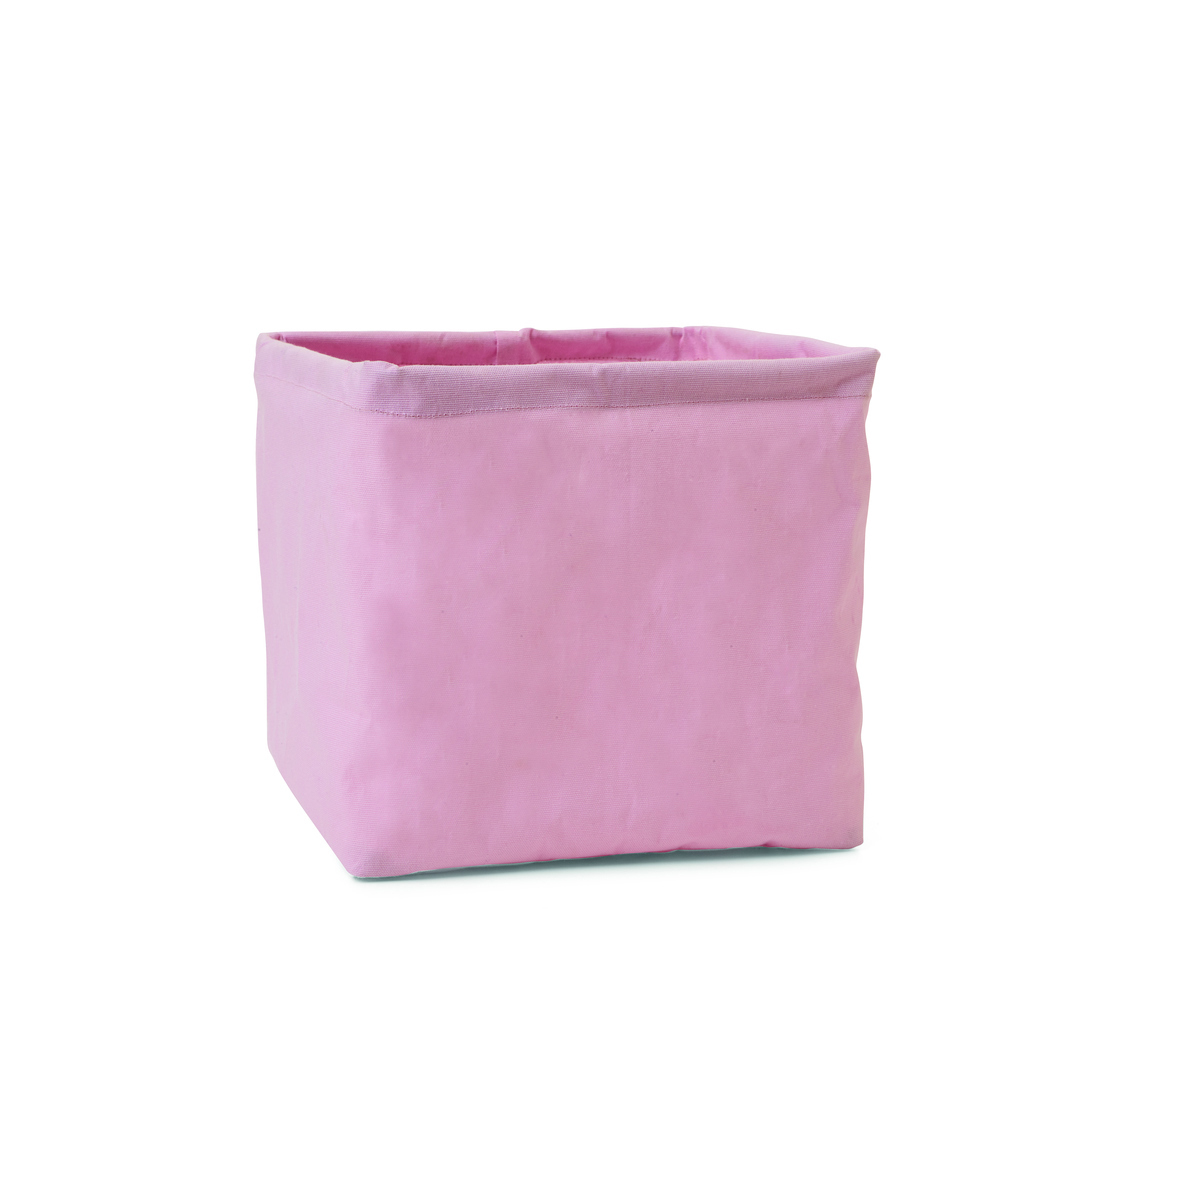 Collapsible Storage Cube - Pink